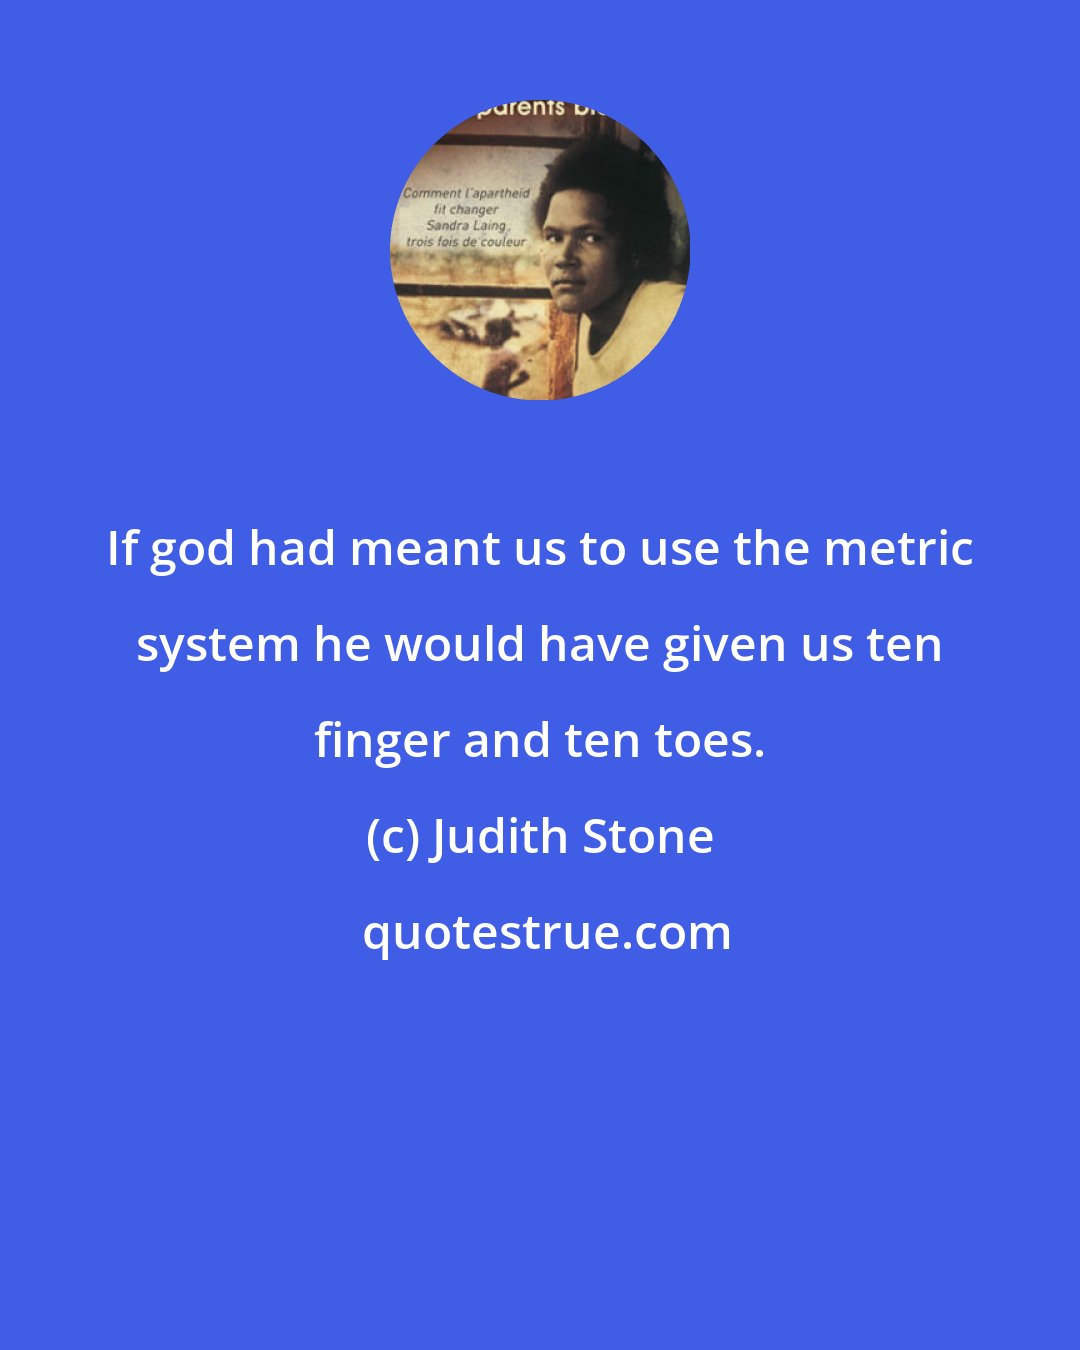 Judith Stone: If god had meant us to use the metric system he would have given us ten finger and ten toes.